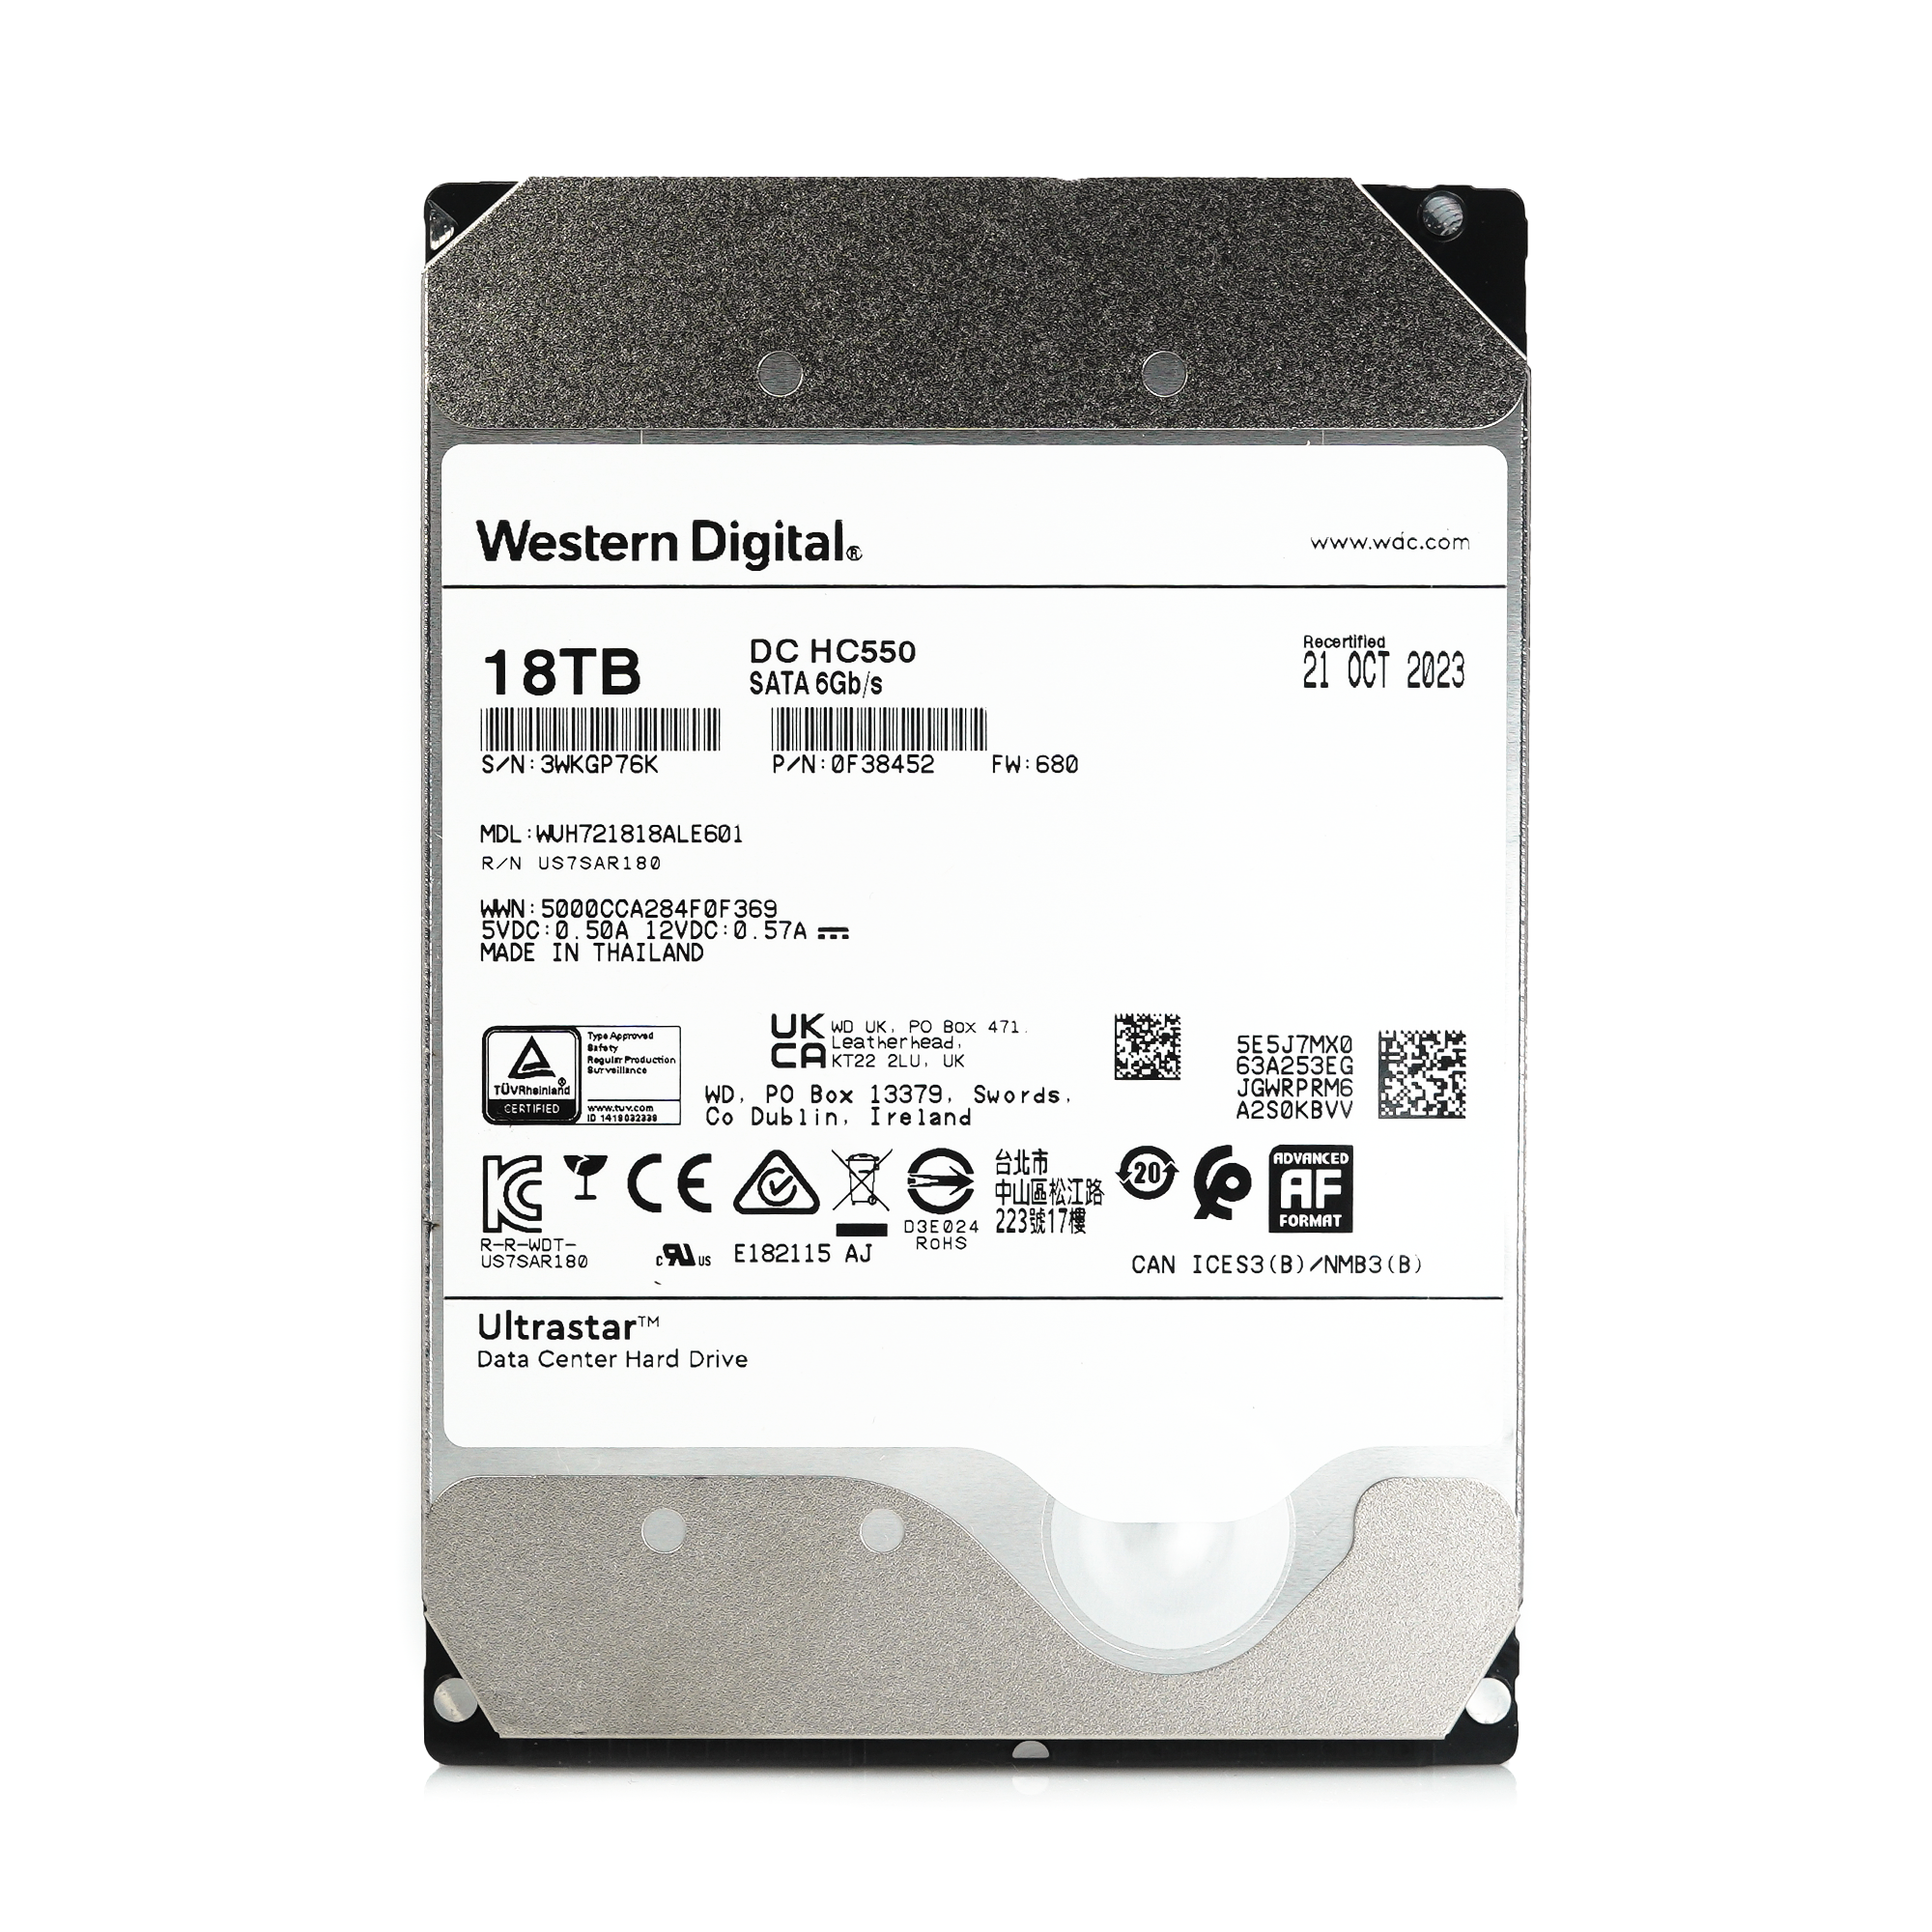 Western Digital Ultrastar DC HC550 WUH721818ALE601 0F38452 18TB 7.2K RPM SATA 6Gb/s 512e TCG-Enterprise SED Power Disable 3.5in Recertified Hard Drive - Front View